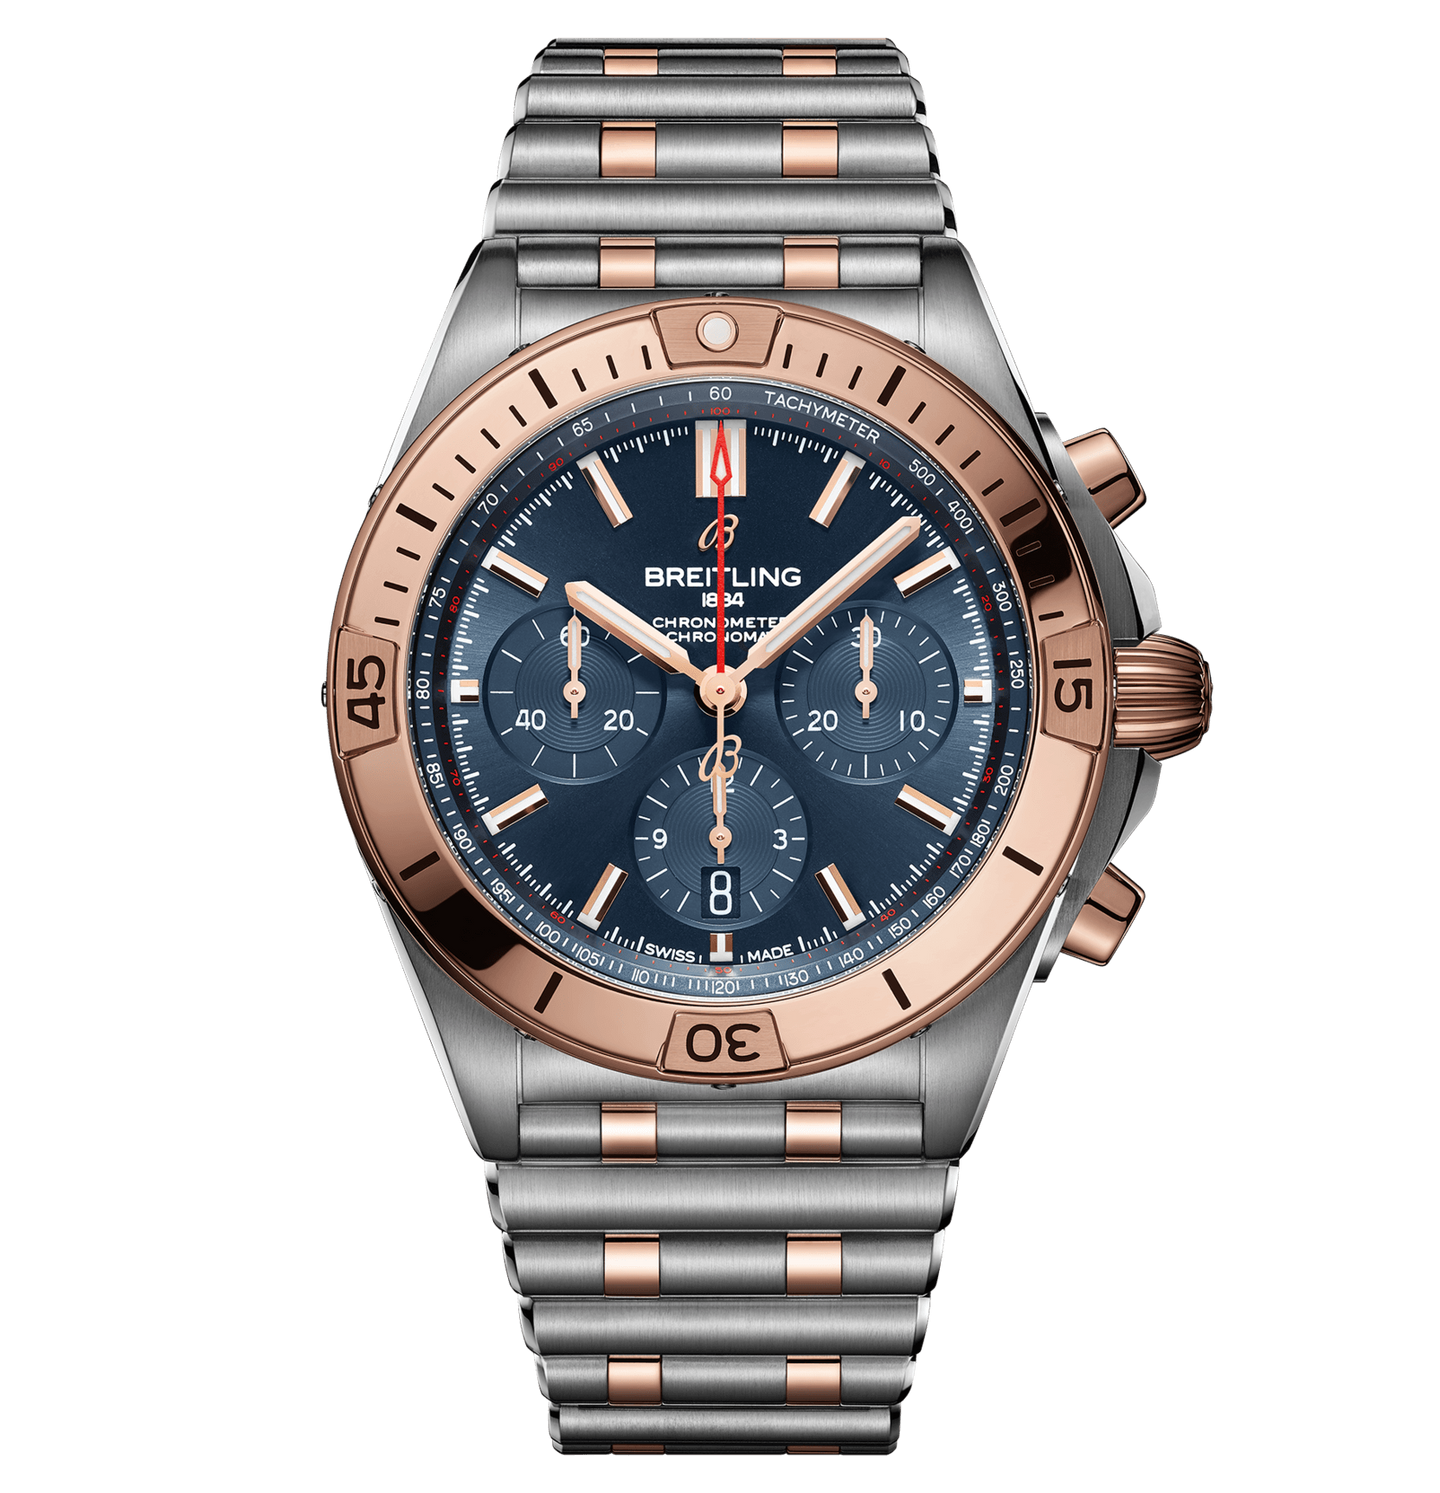 Breitling Chronomat B01 Chronograph 42 Steel & 18K Red Gold with Blue Dial